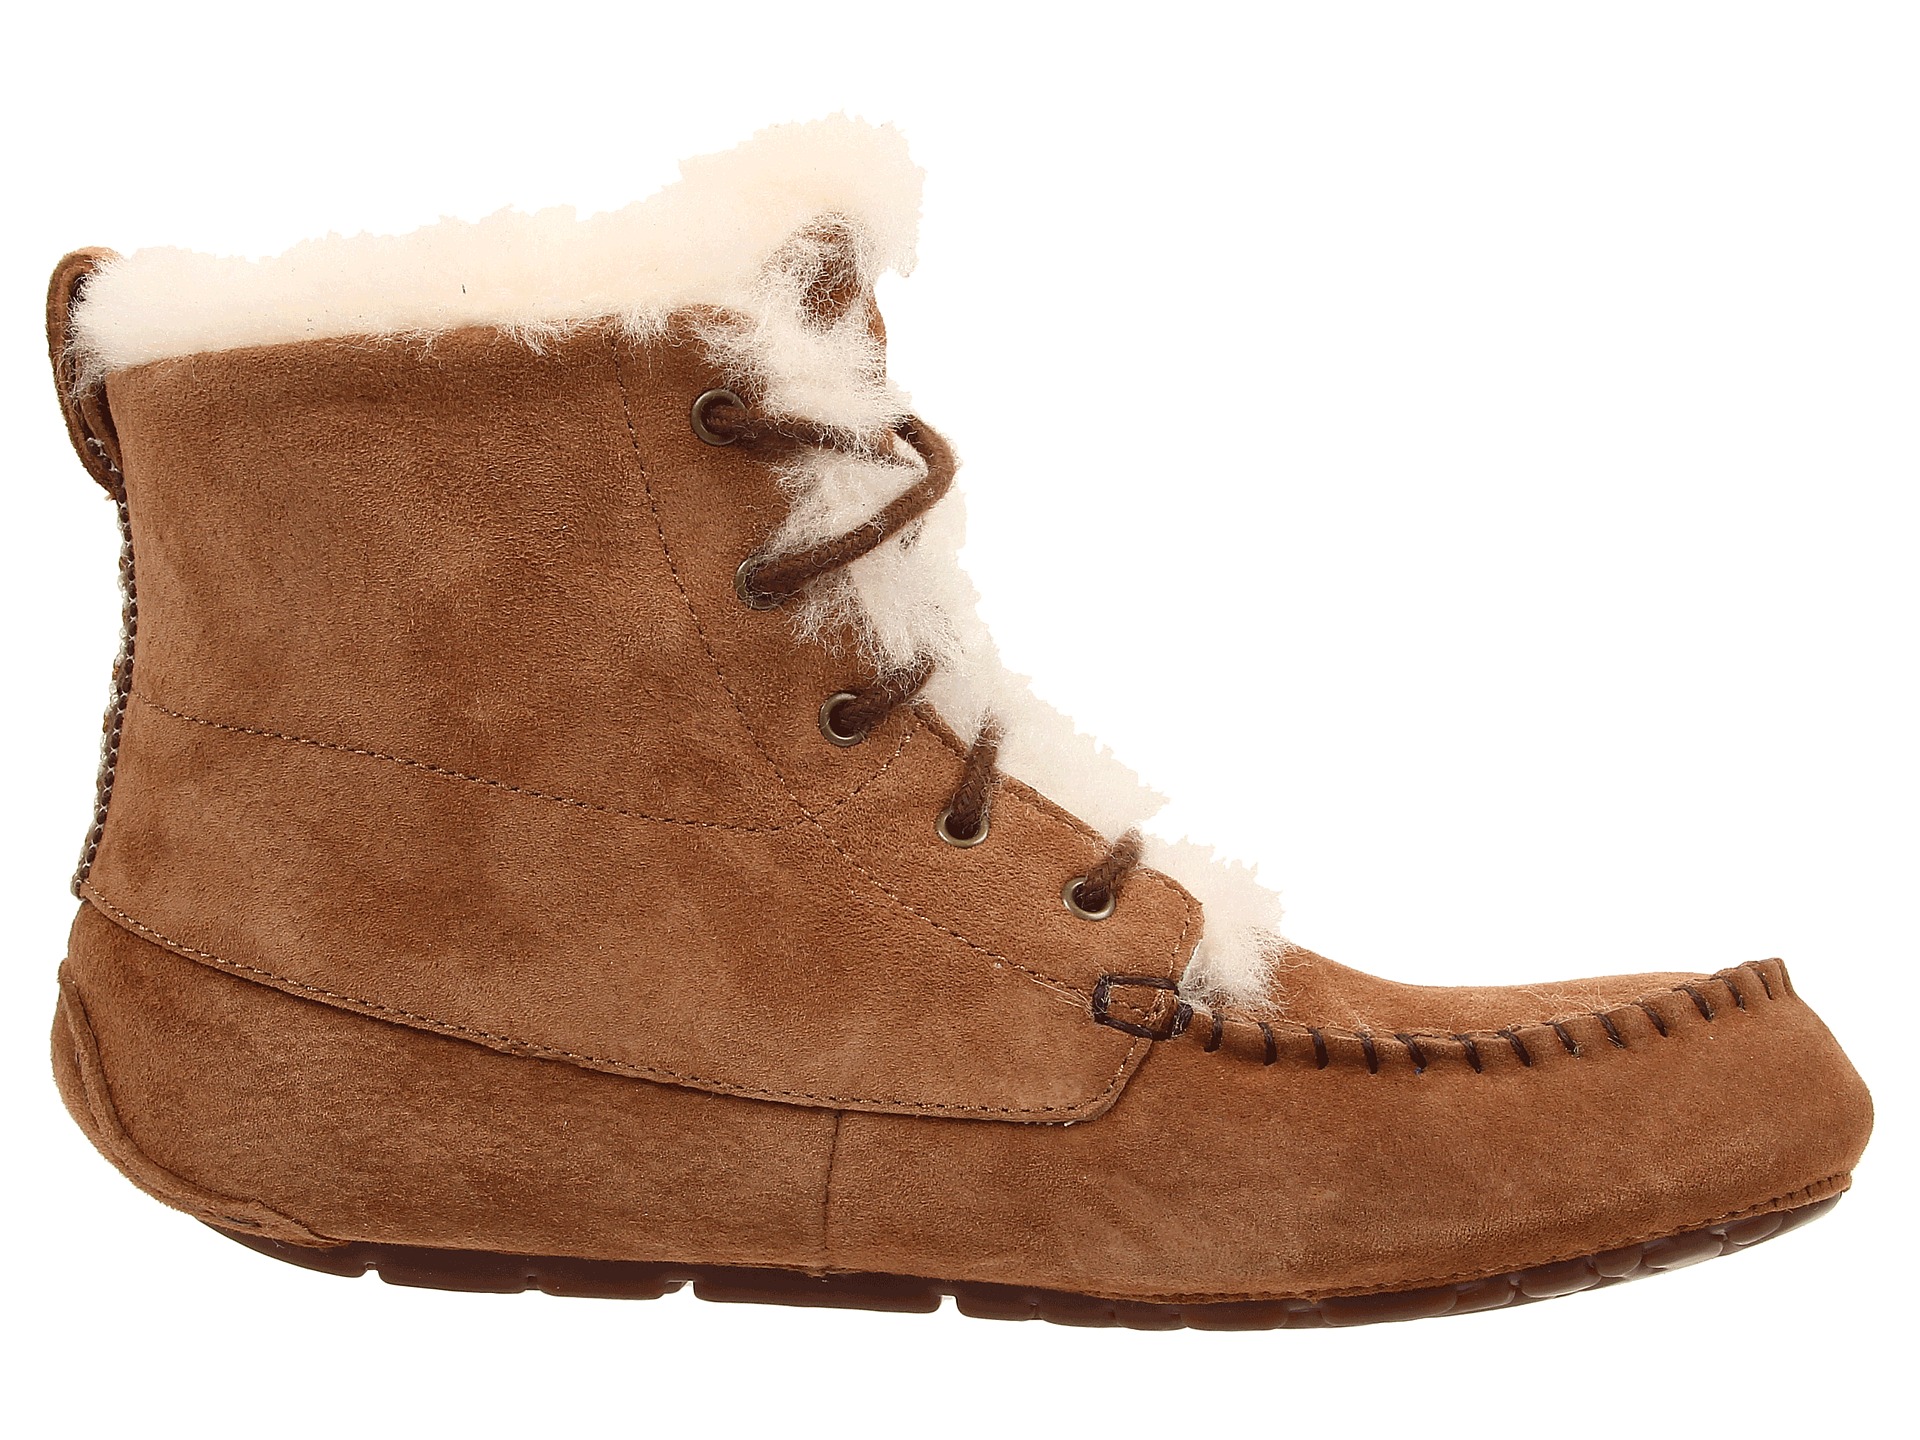 UGG Chickaree Chestnut Suede - Zappos.com Free Shipping BOTH Ways